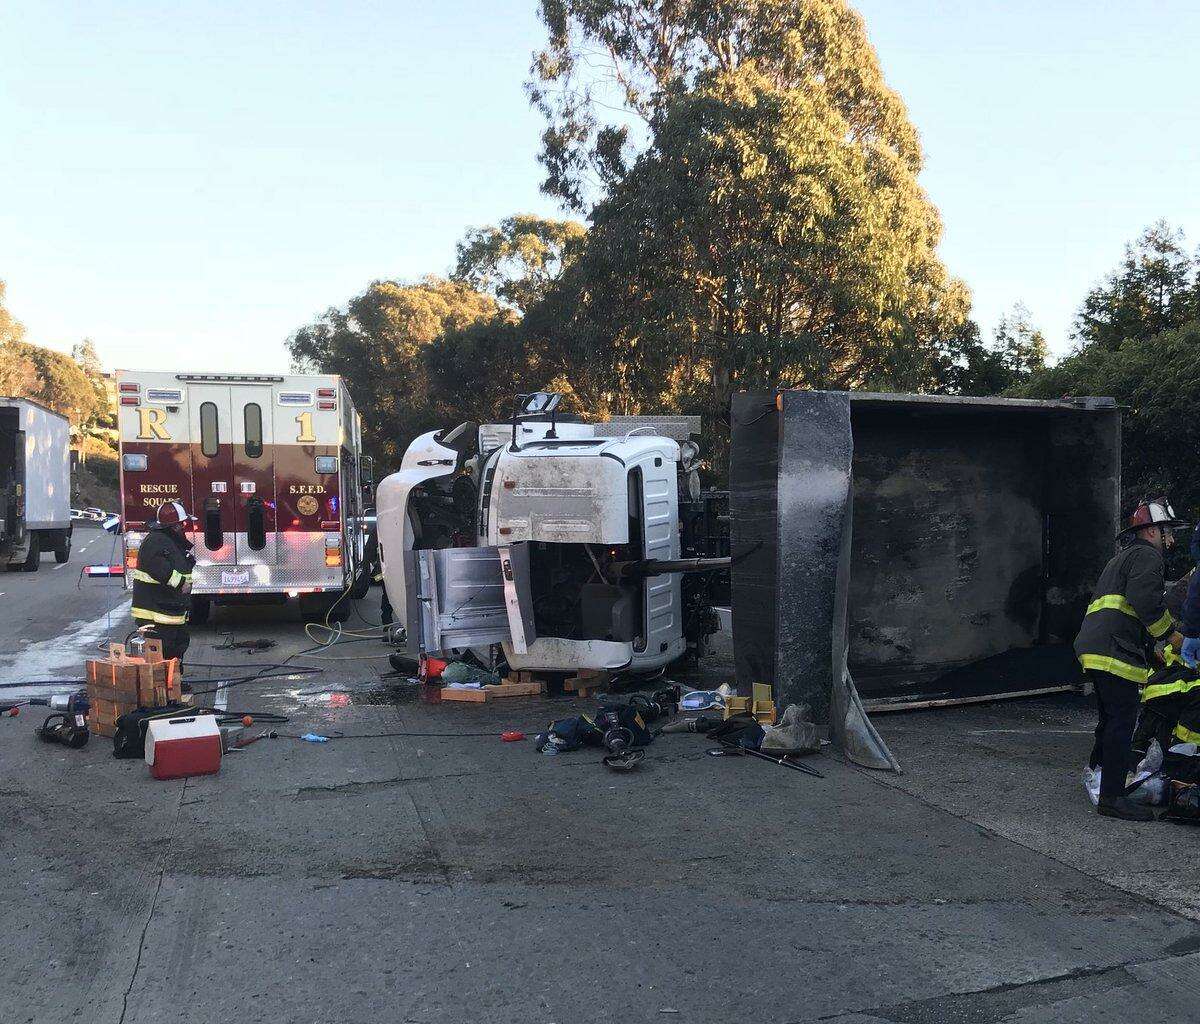 A person was killed in a collision with a dump truck and a Muni bus on Friday afternoon in San Francisco, authorities said.